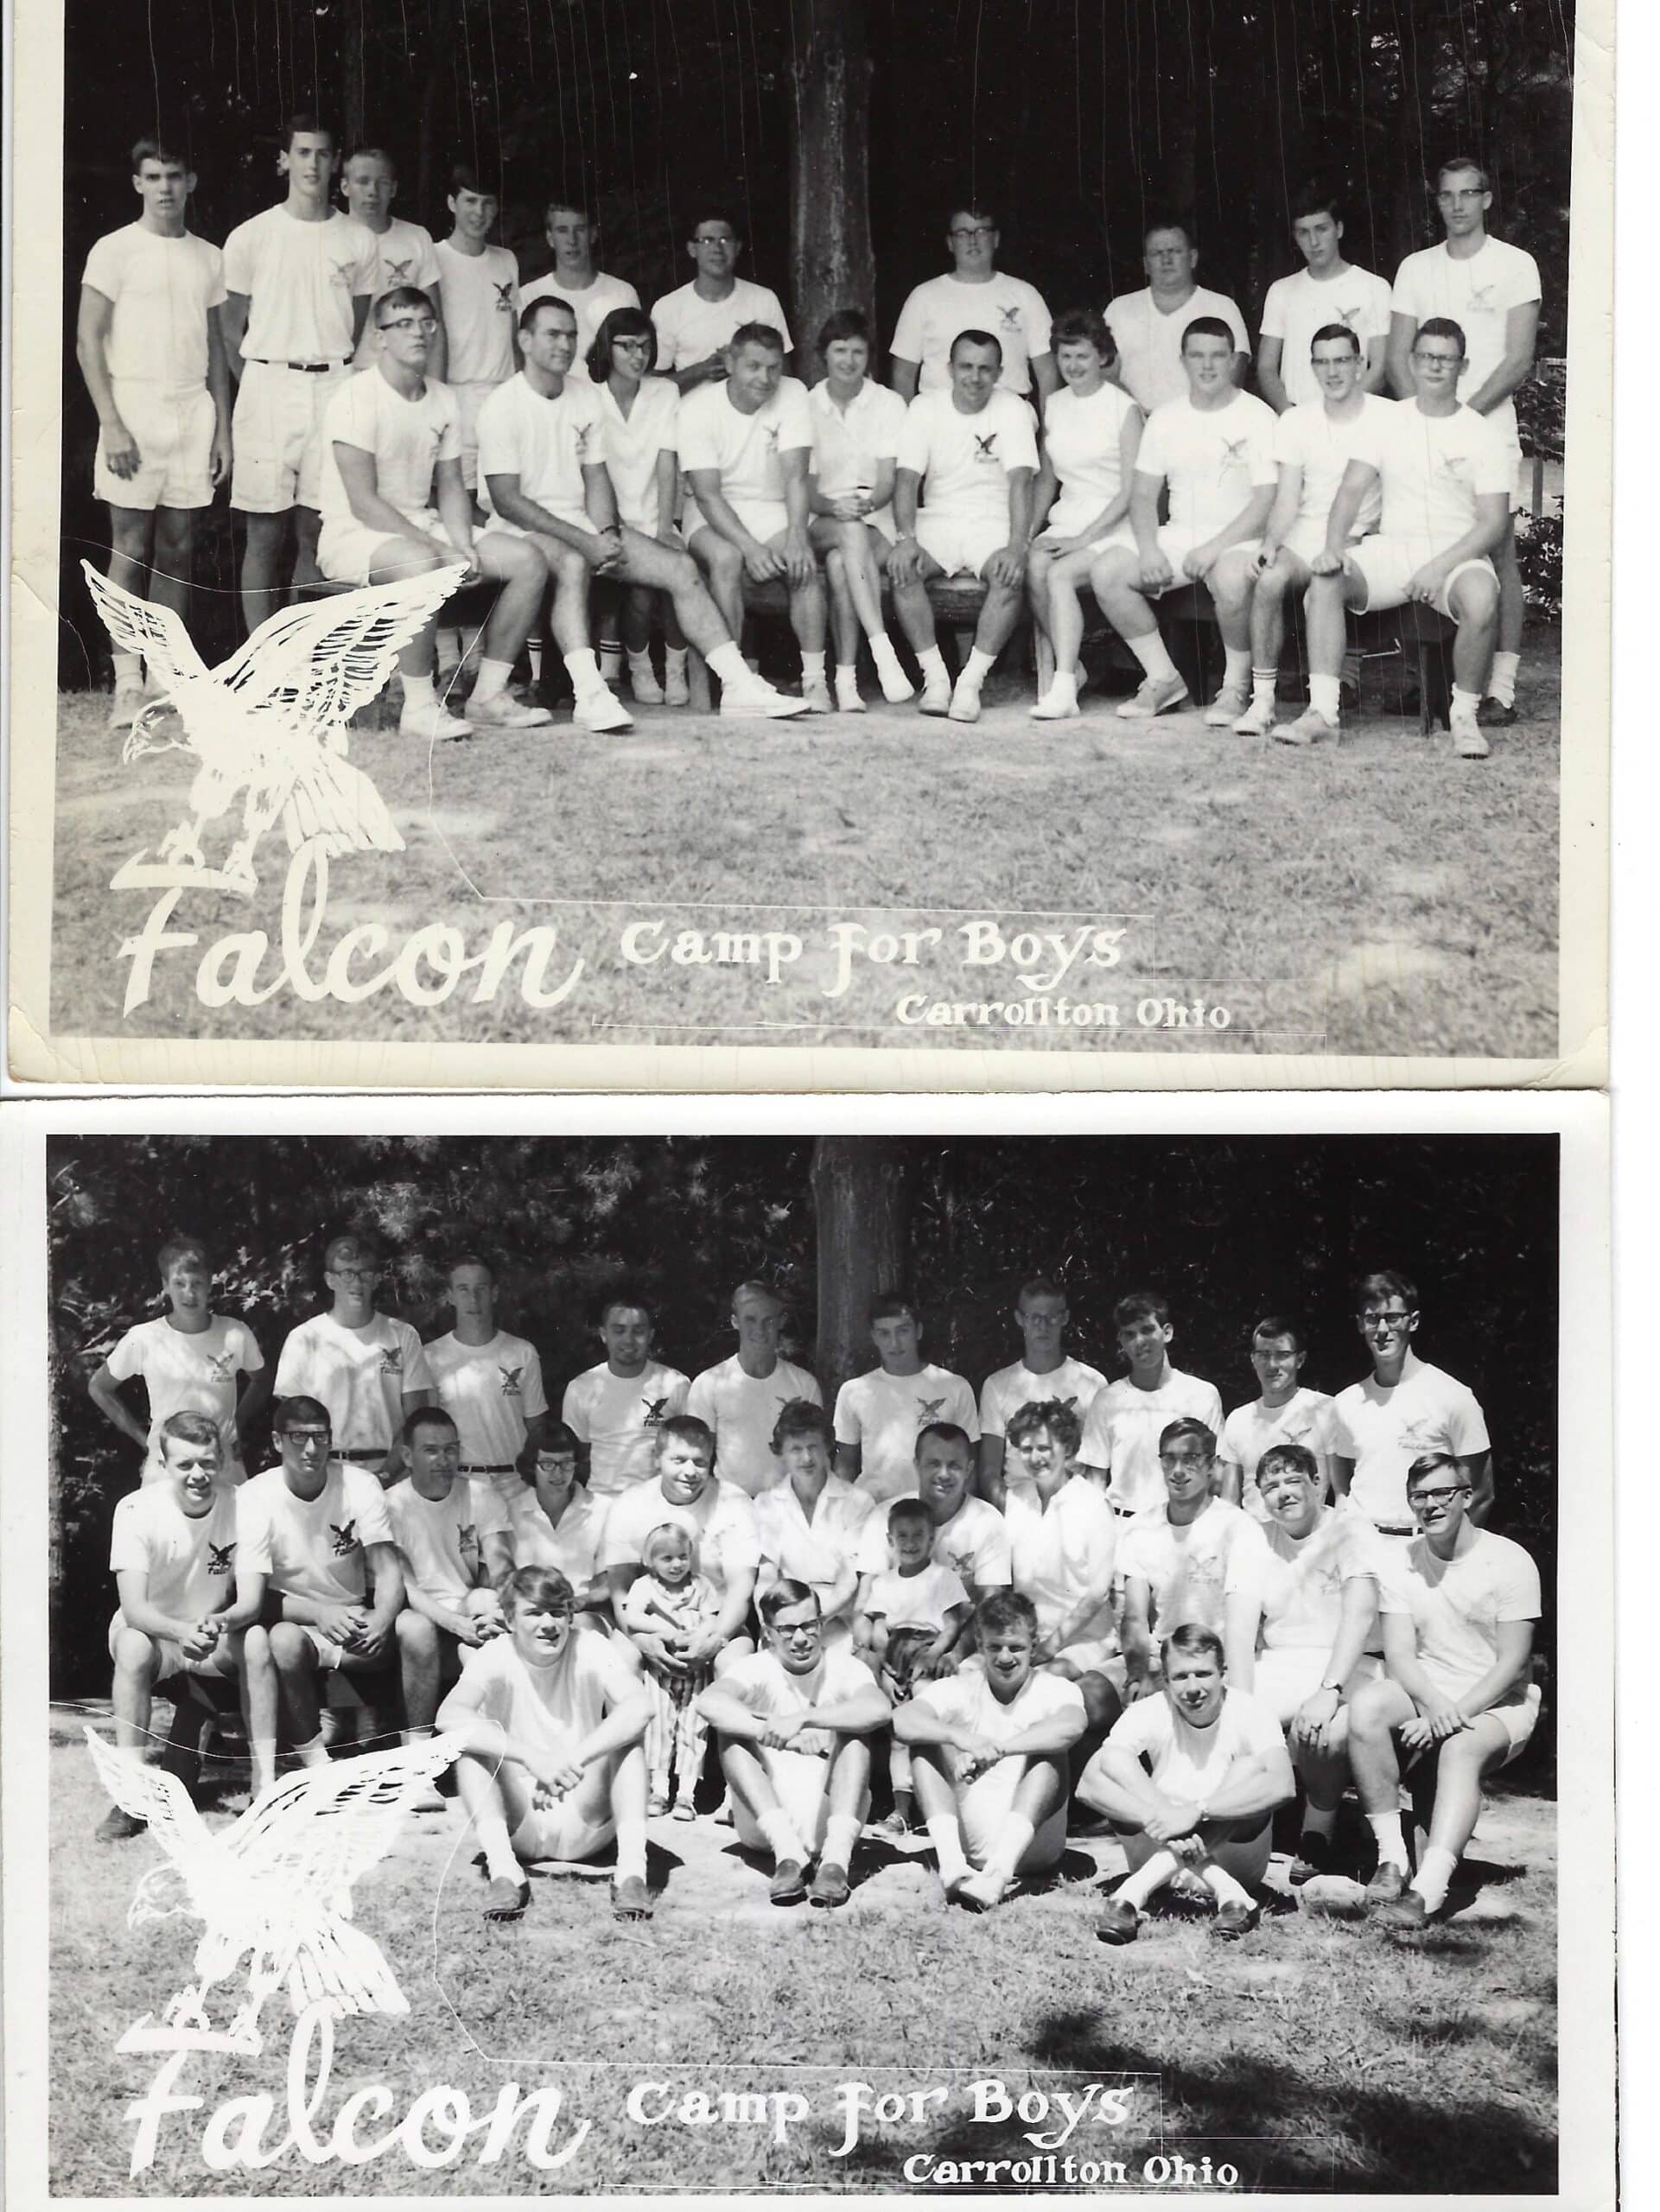 Staff photo from 1961 or 1962